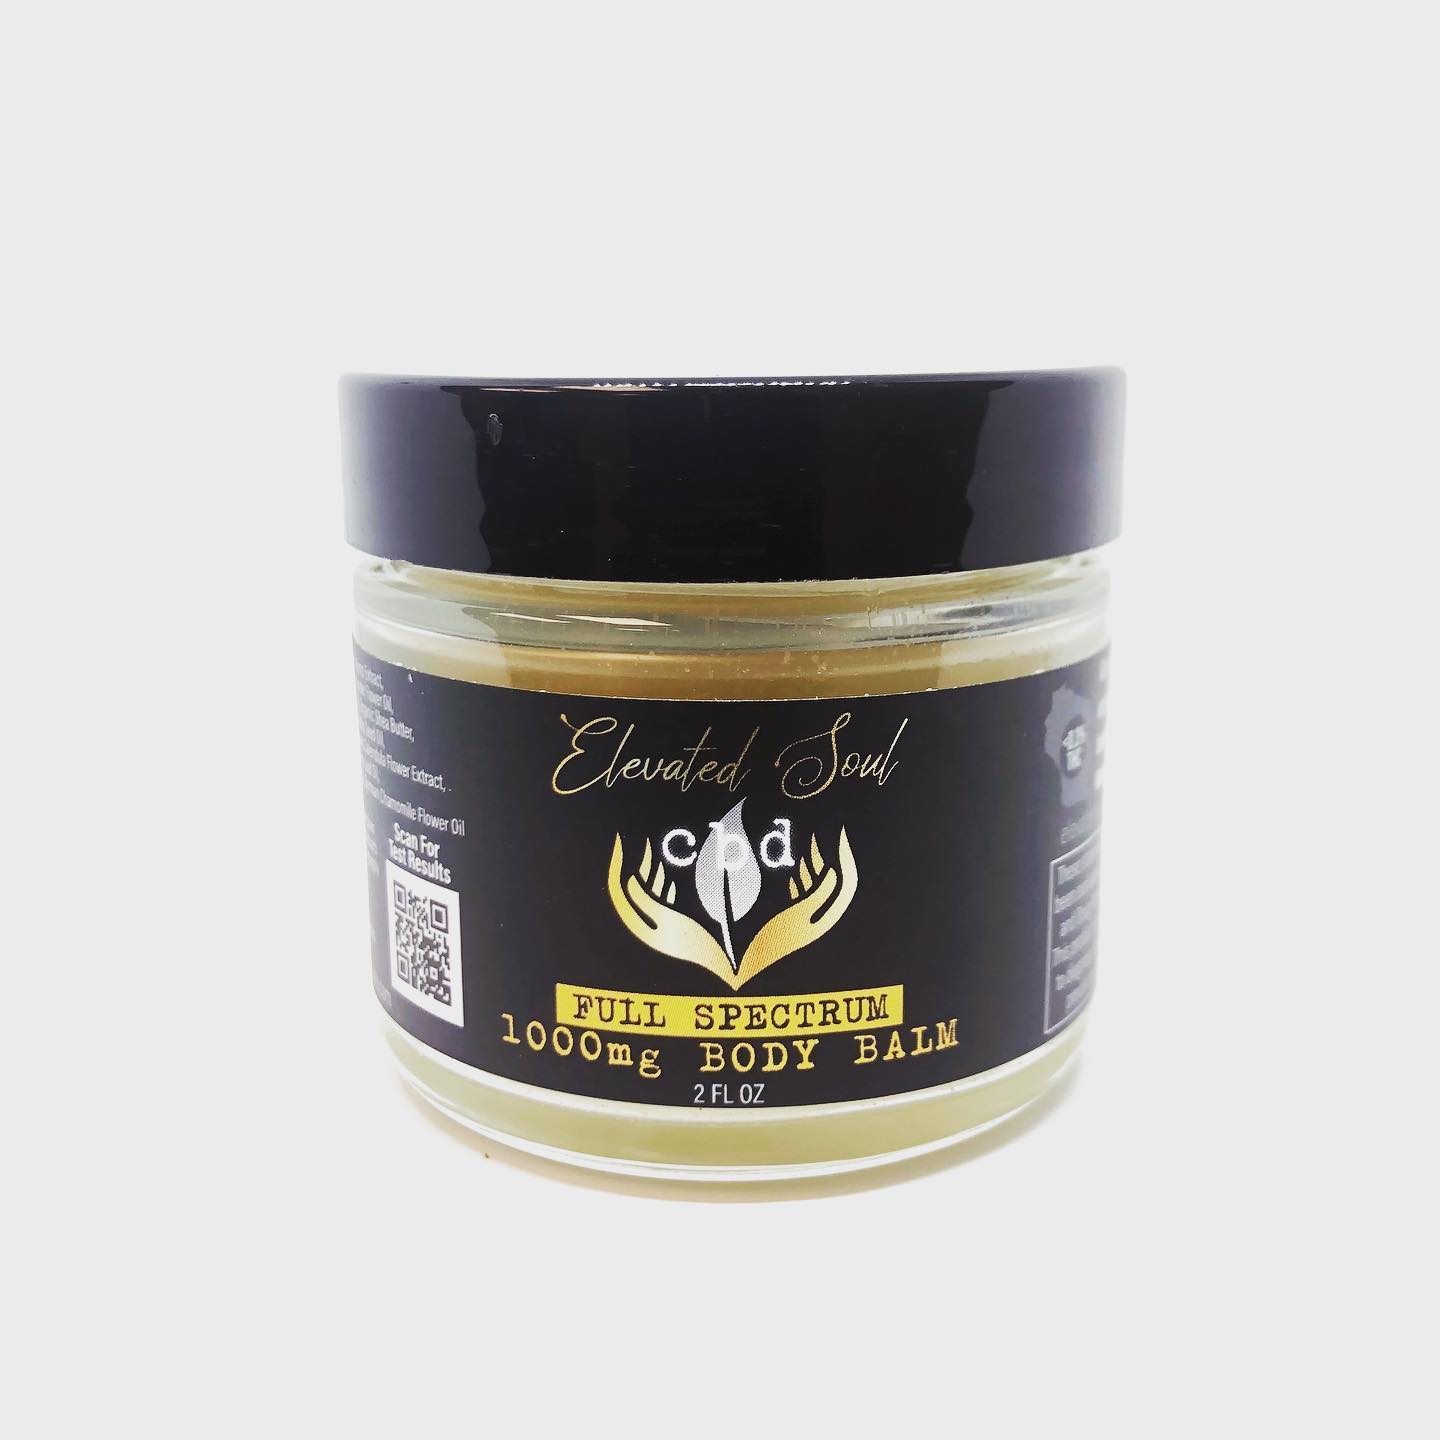 ELEVATED SOUL CBD REVIEW